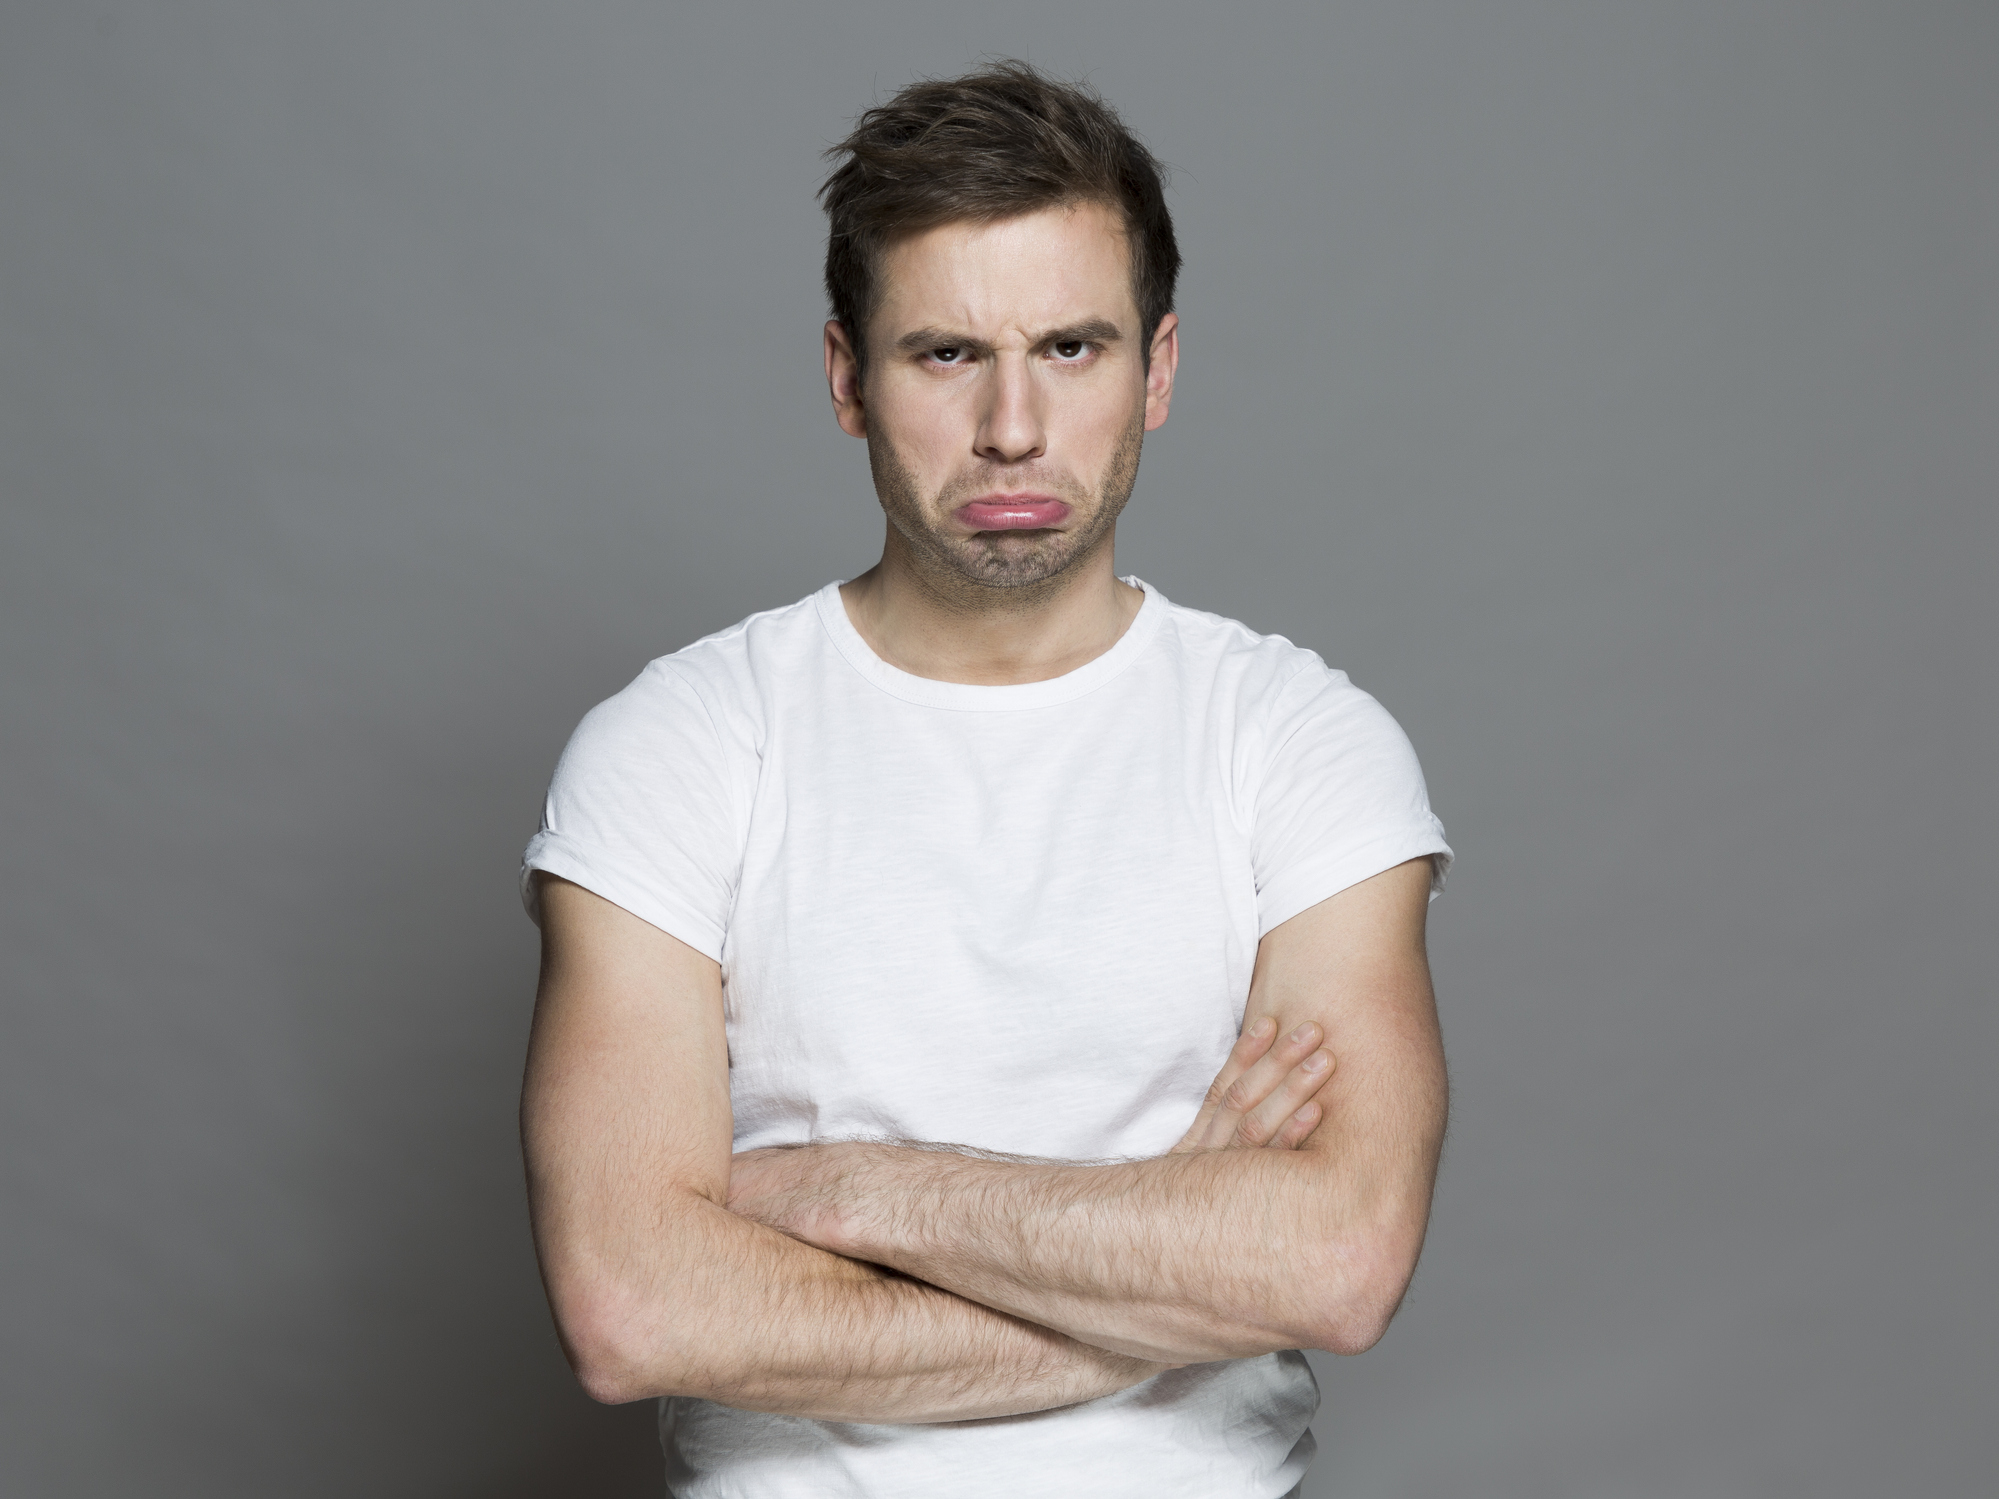 Man with a frown and crossed arms expressing discontent